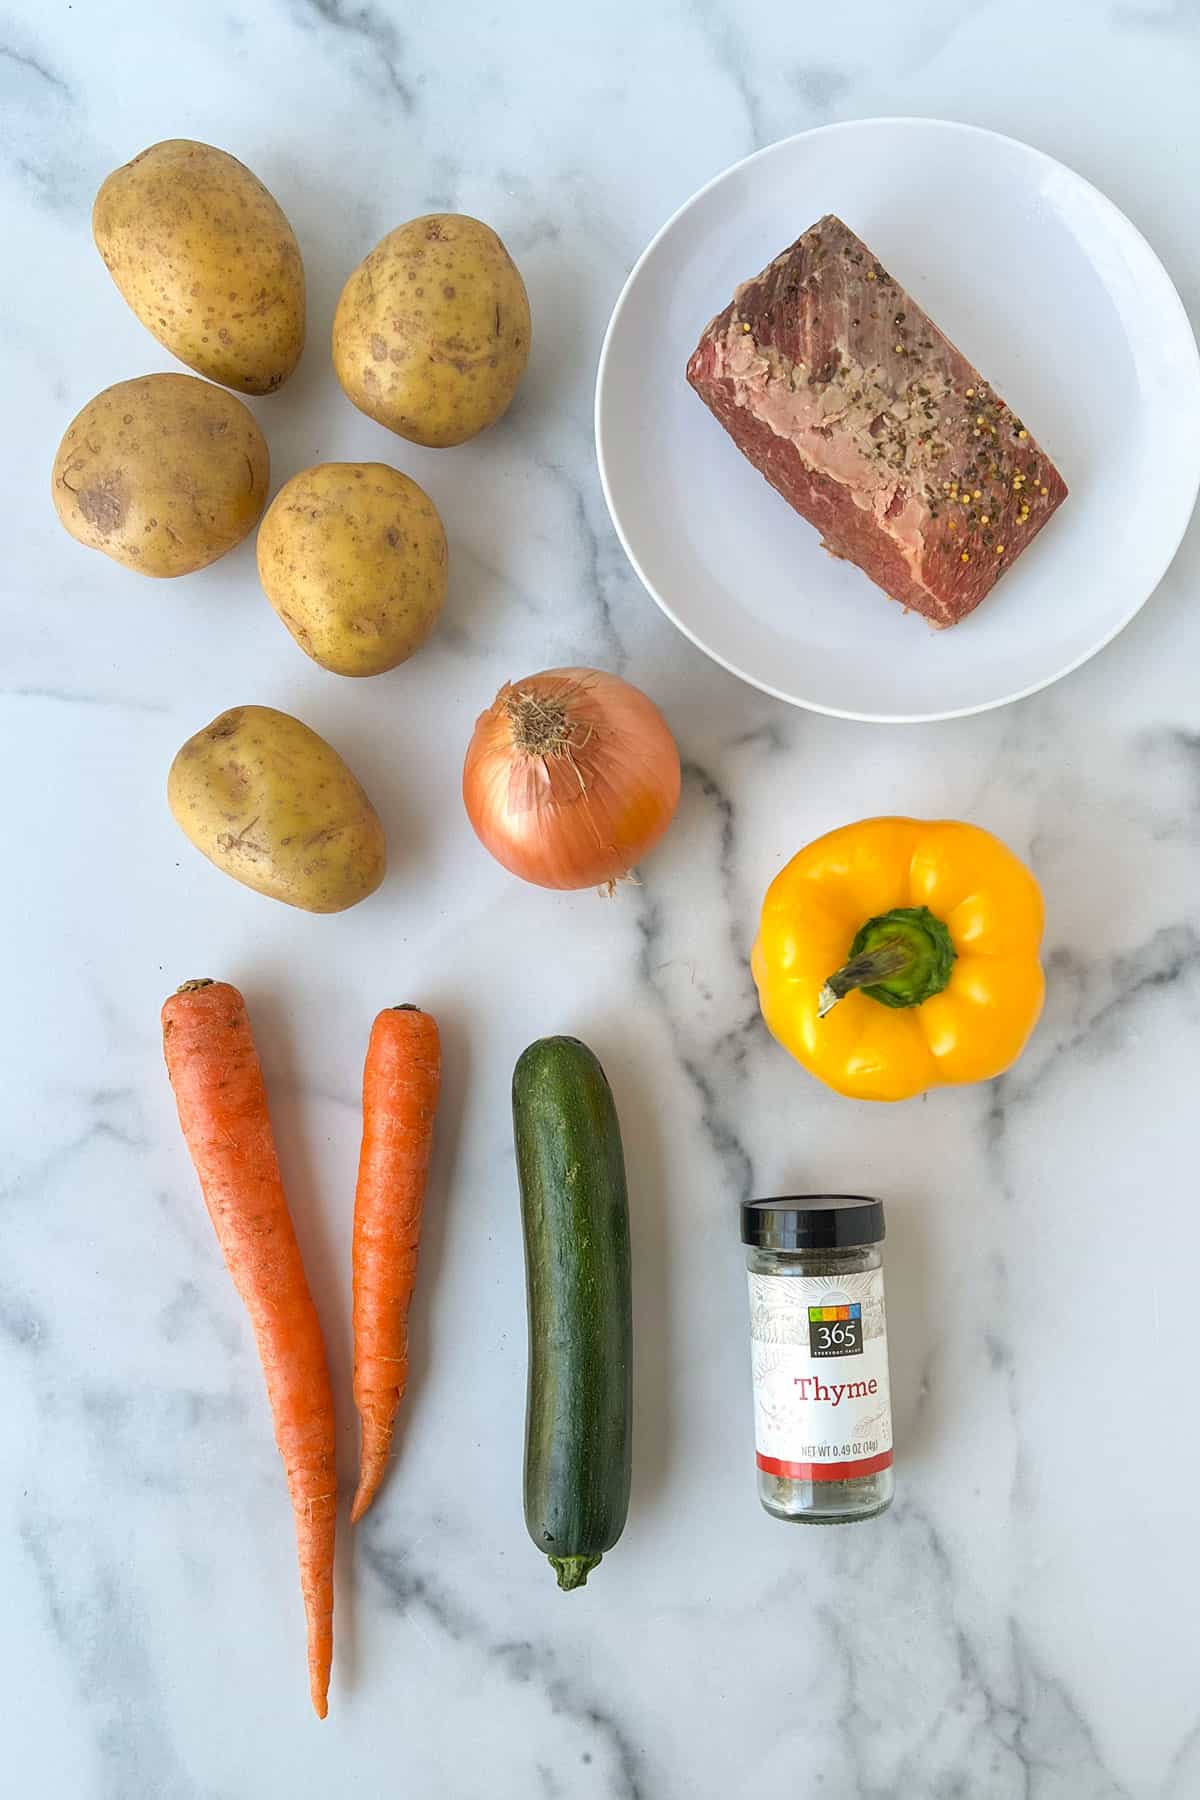 Corned beef hash ingredients on a marble countertop: 5 yellow flesh potatoes, two carrots, one zucchini, a yellow pepper, a hunk of corned beef and a jar of dried thyme.